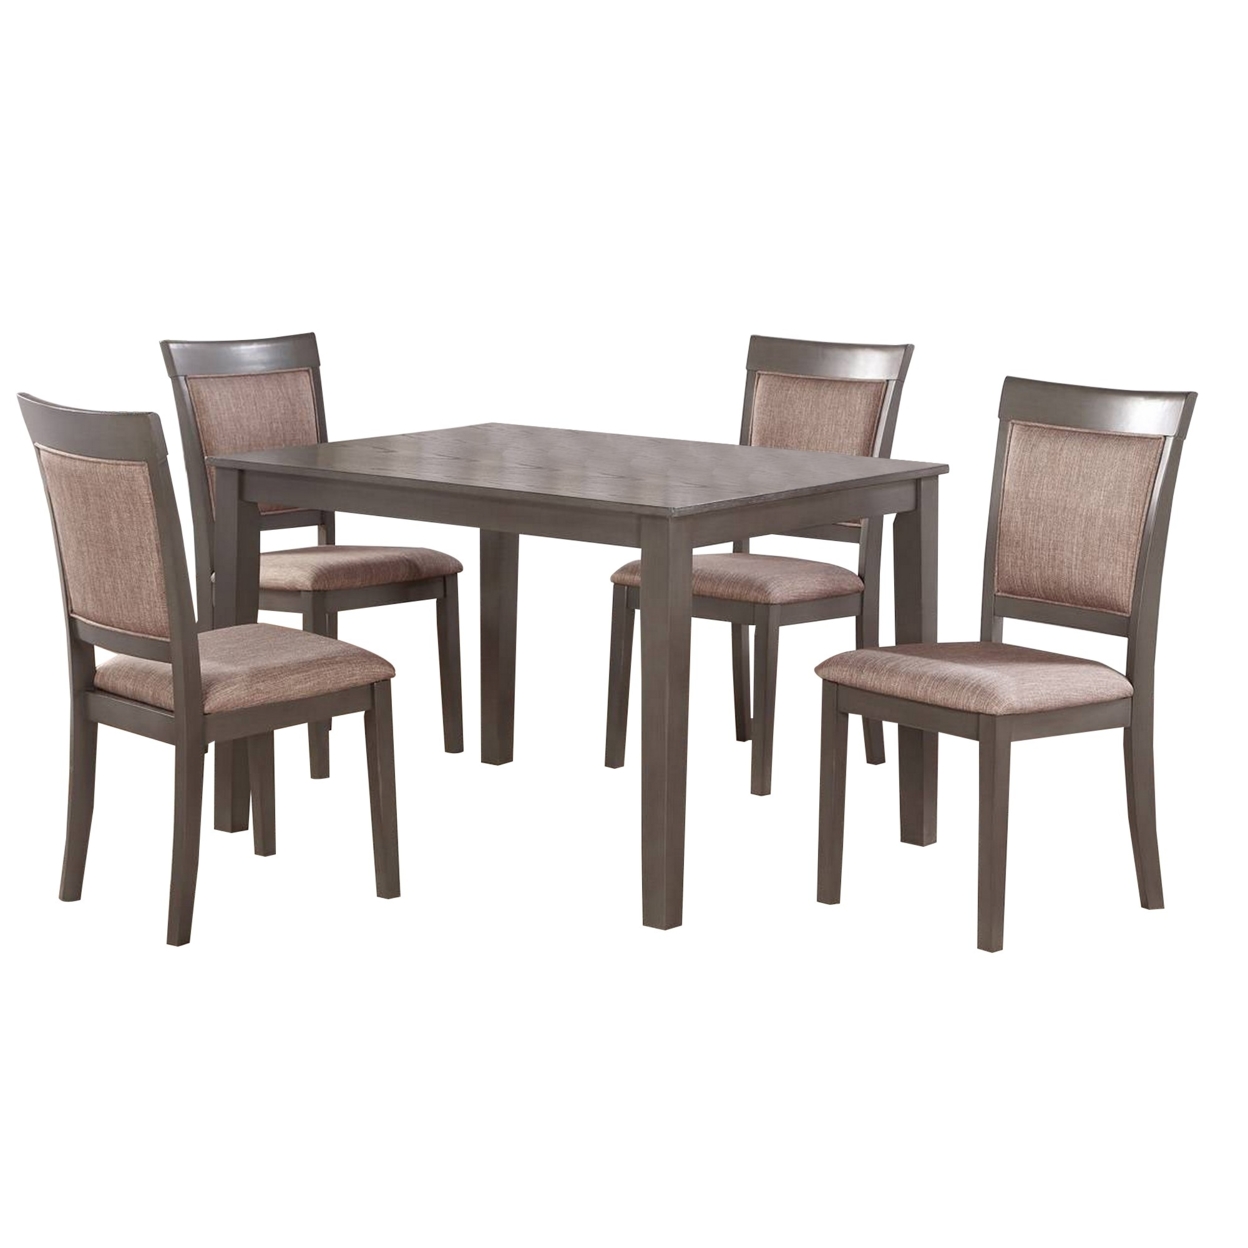 5 Piece Dining Set, Rectangular Table, 4 Chairs, Padded Seats, Taupe Gray